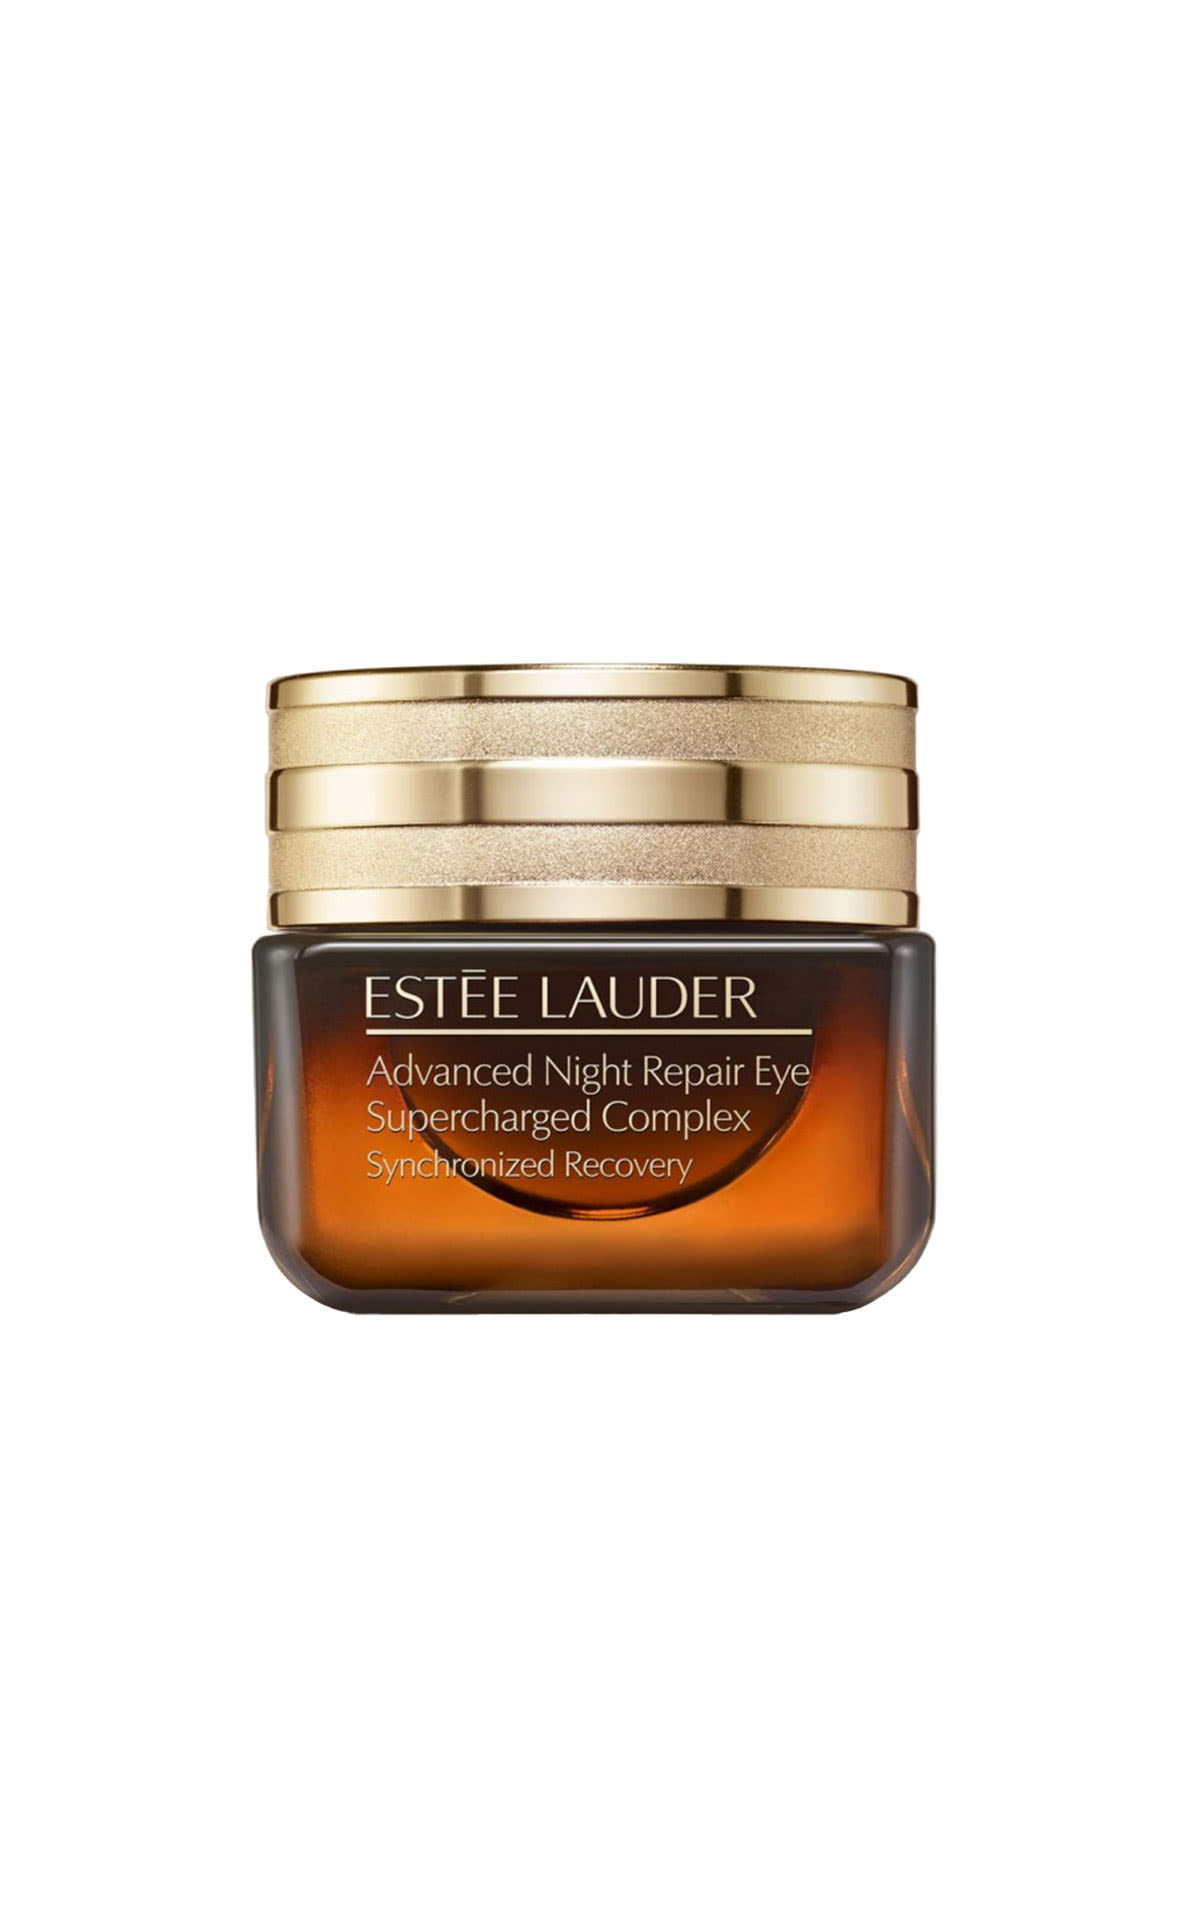 Advanced Night Repair Eye Supercharged Complex The Comestics Company Store